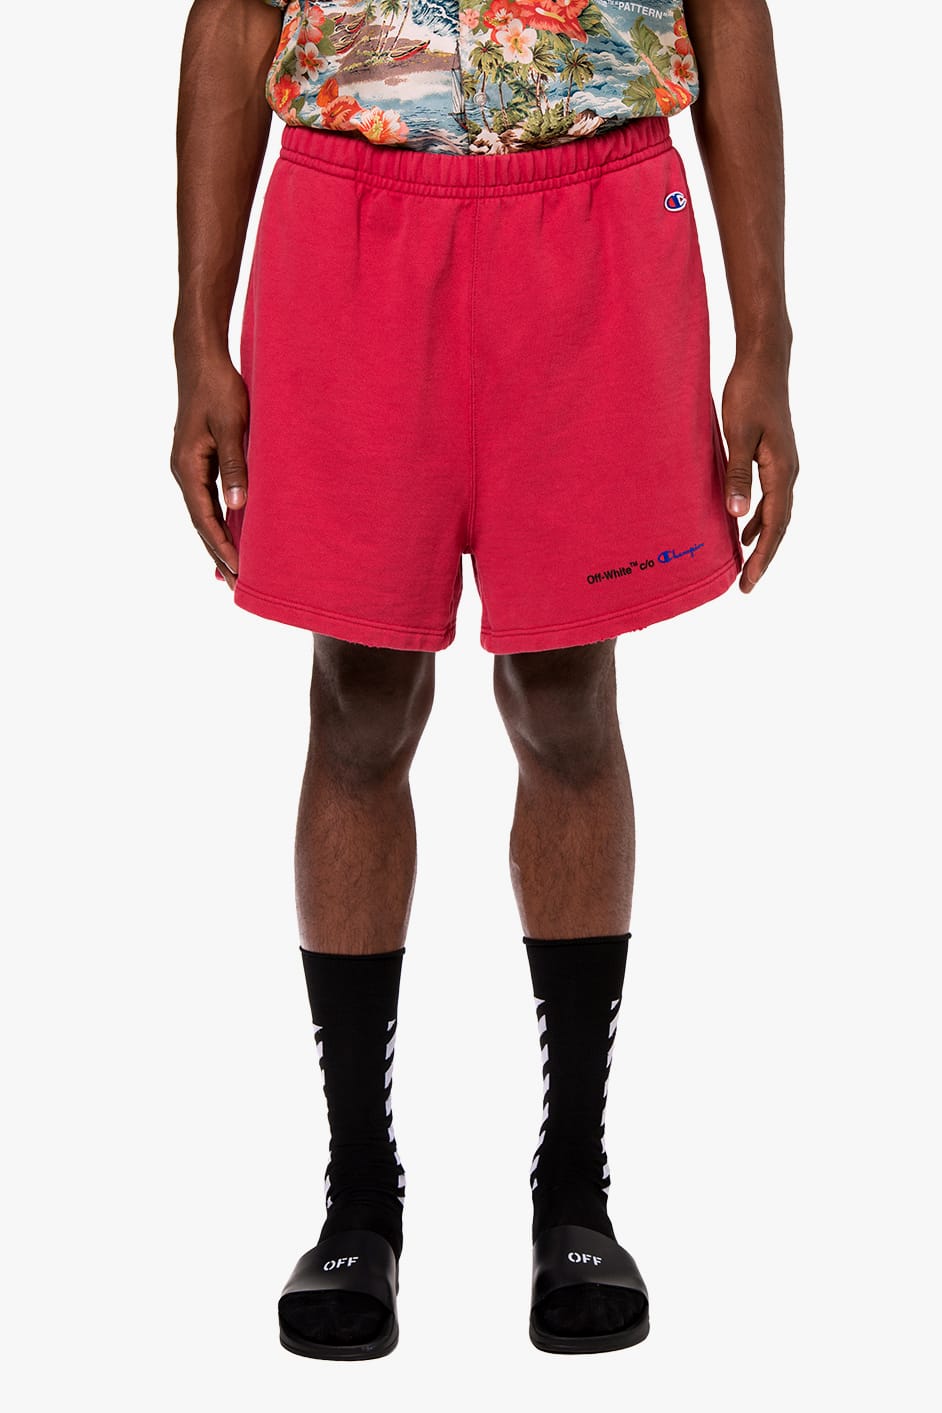 off white champion red shorts